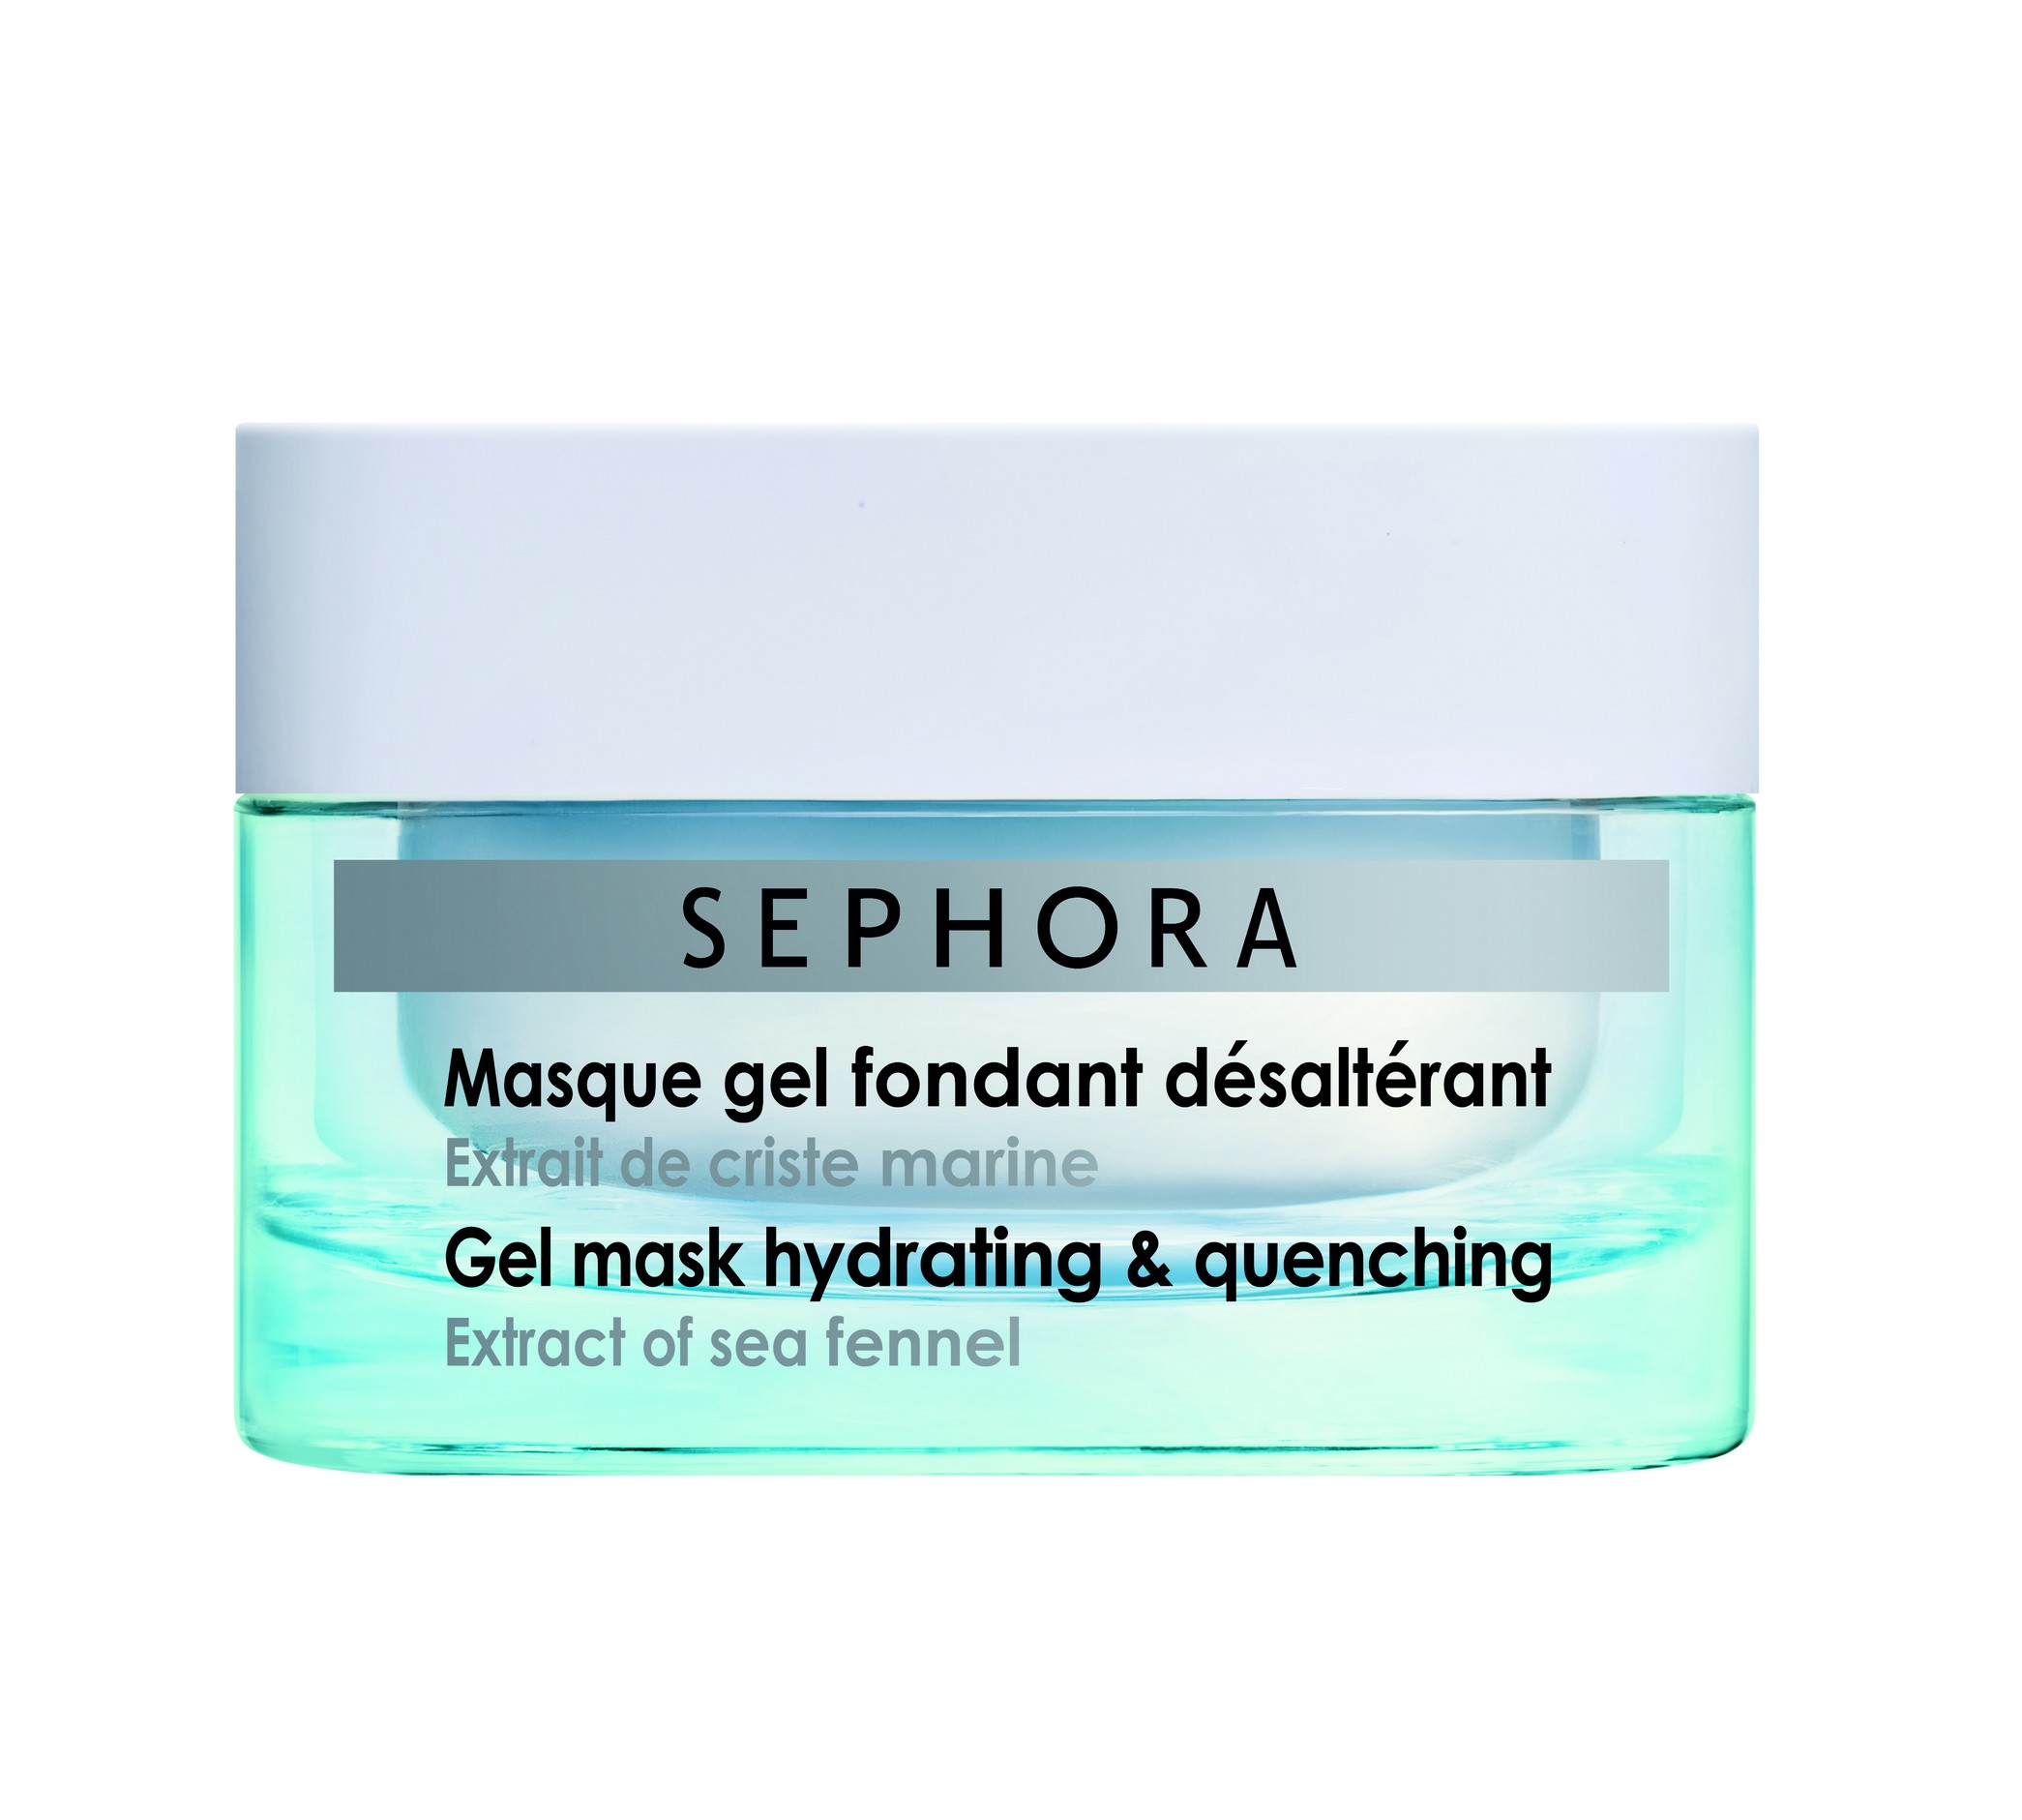 Gel mask hydrating & quenching | Made in Sephora